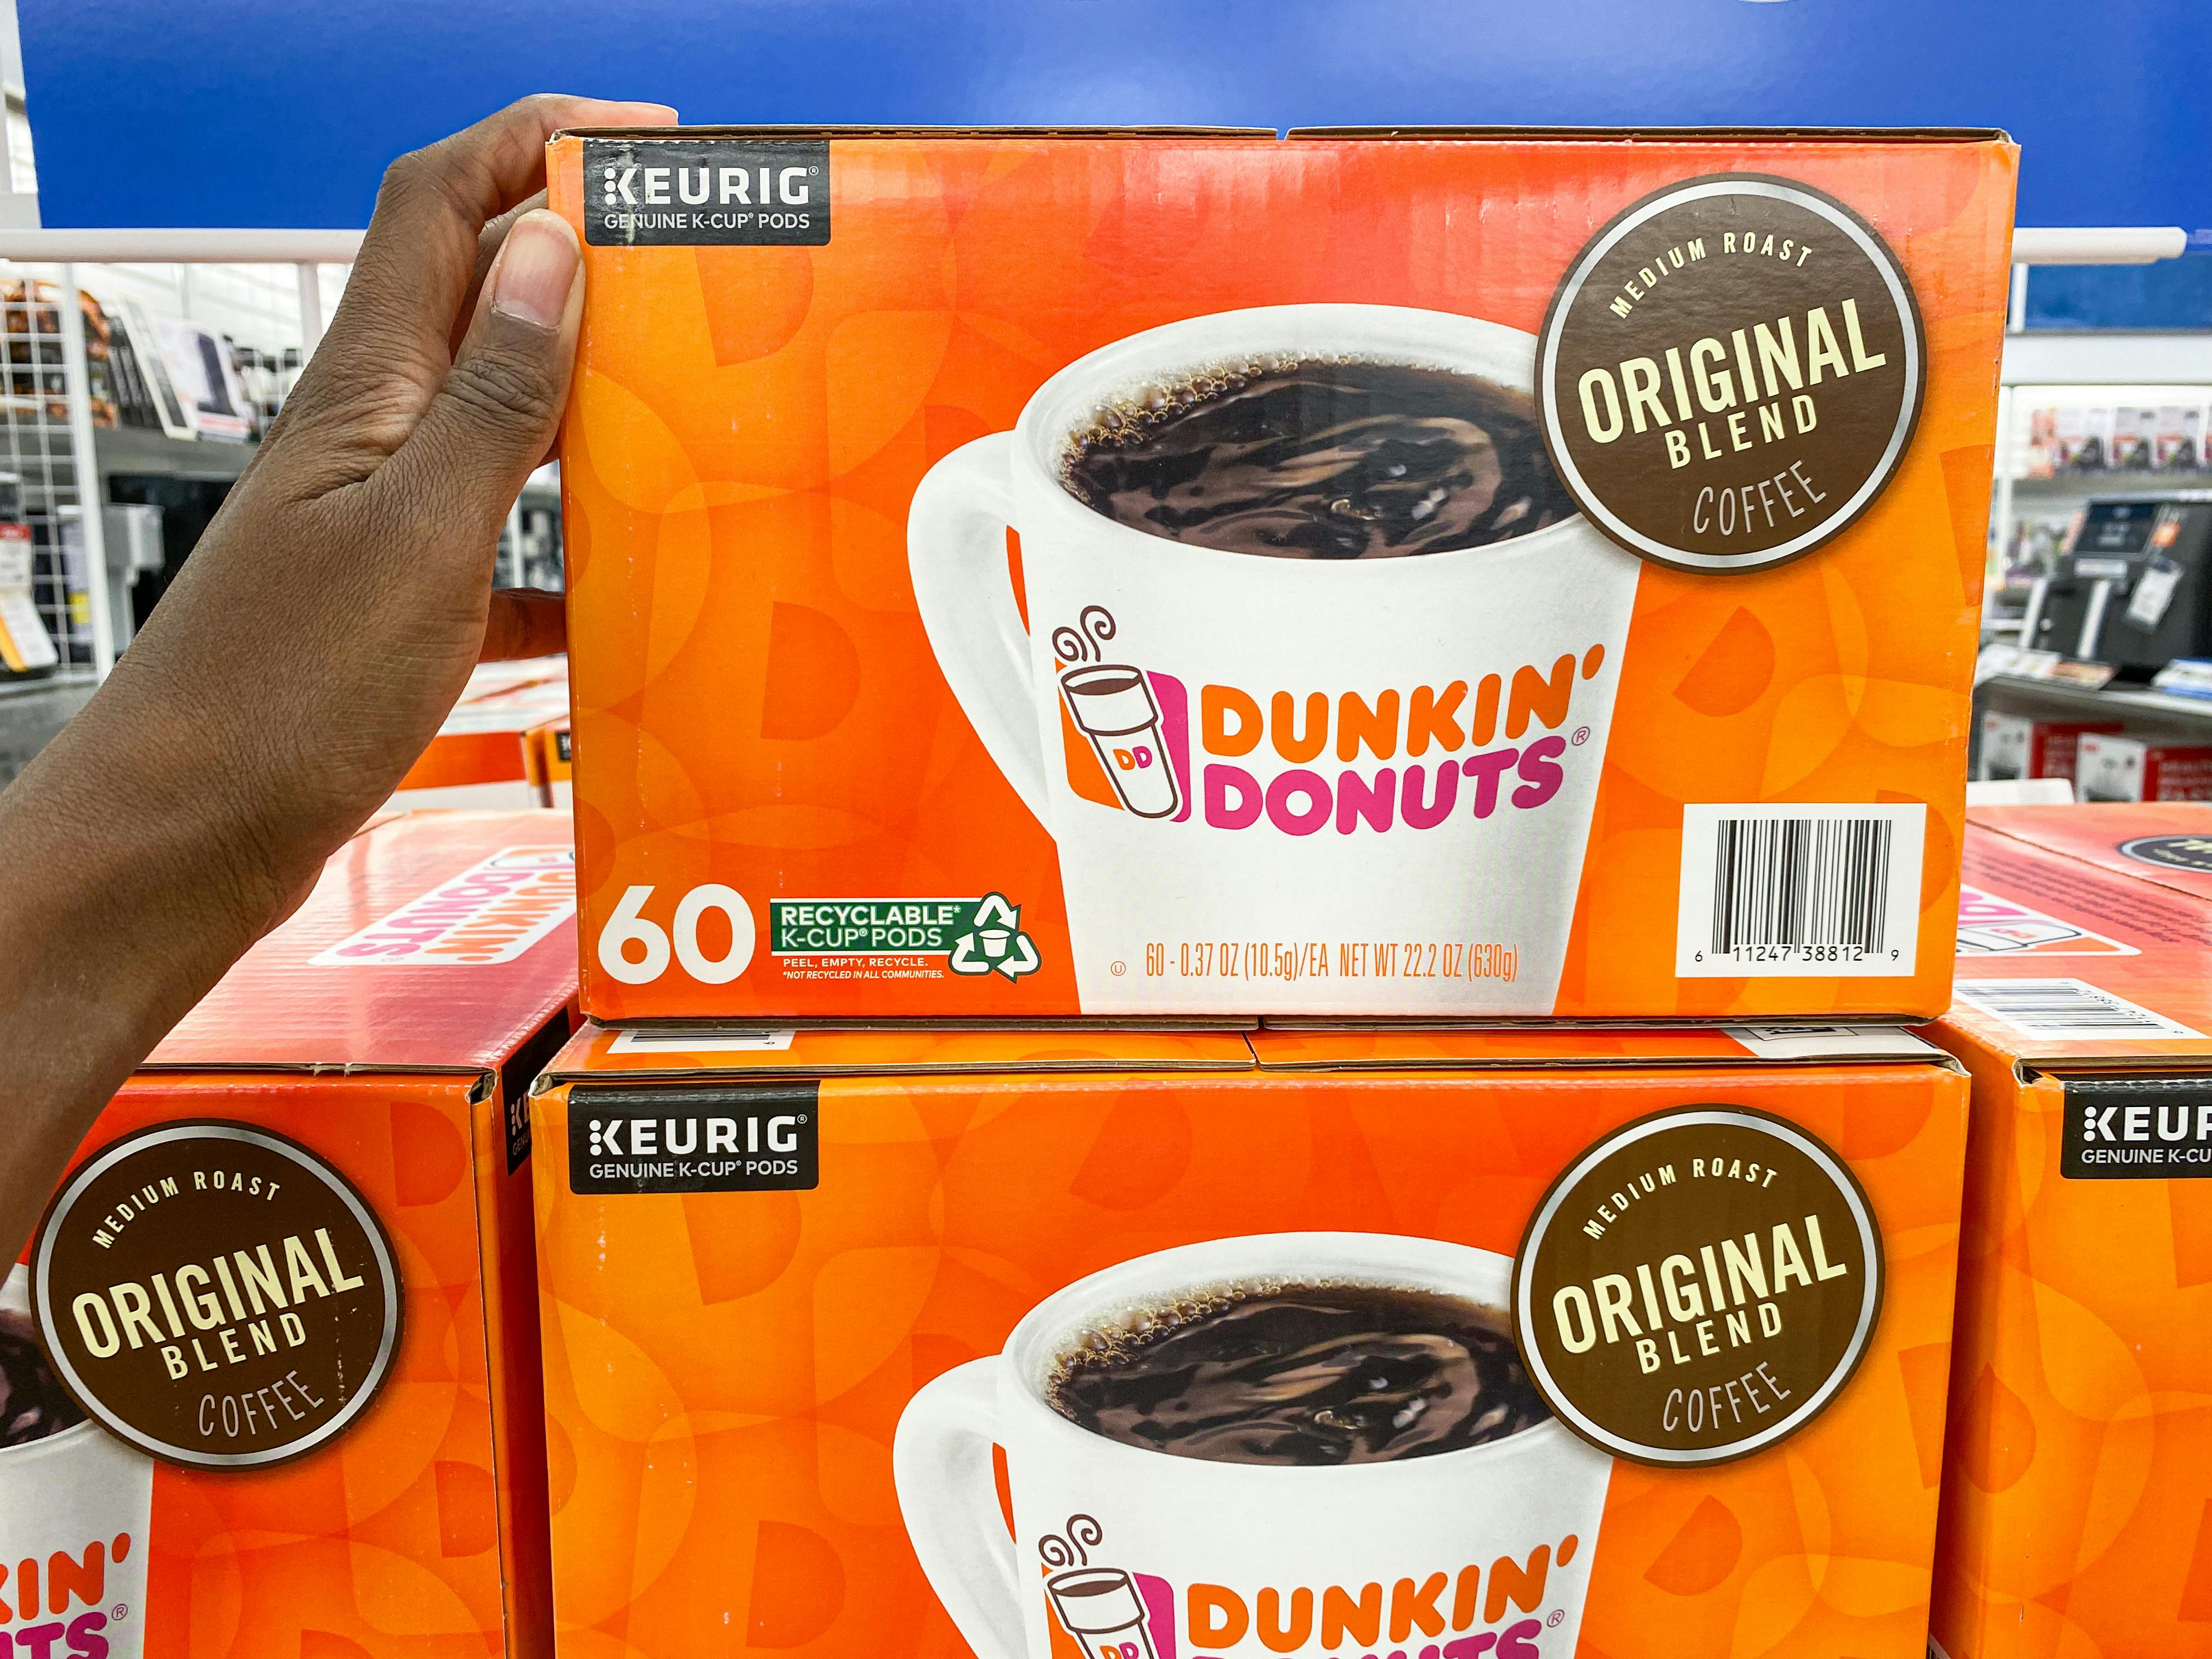 a box of Keurig dunking donuts k-cups on top of another box in bed bath and beyond